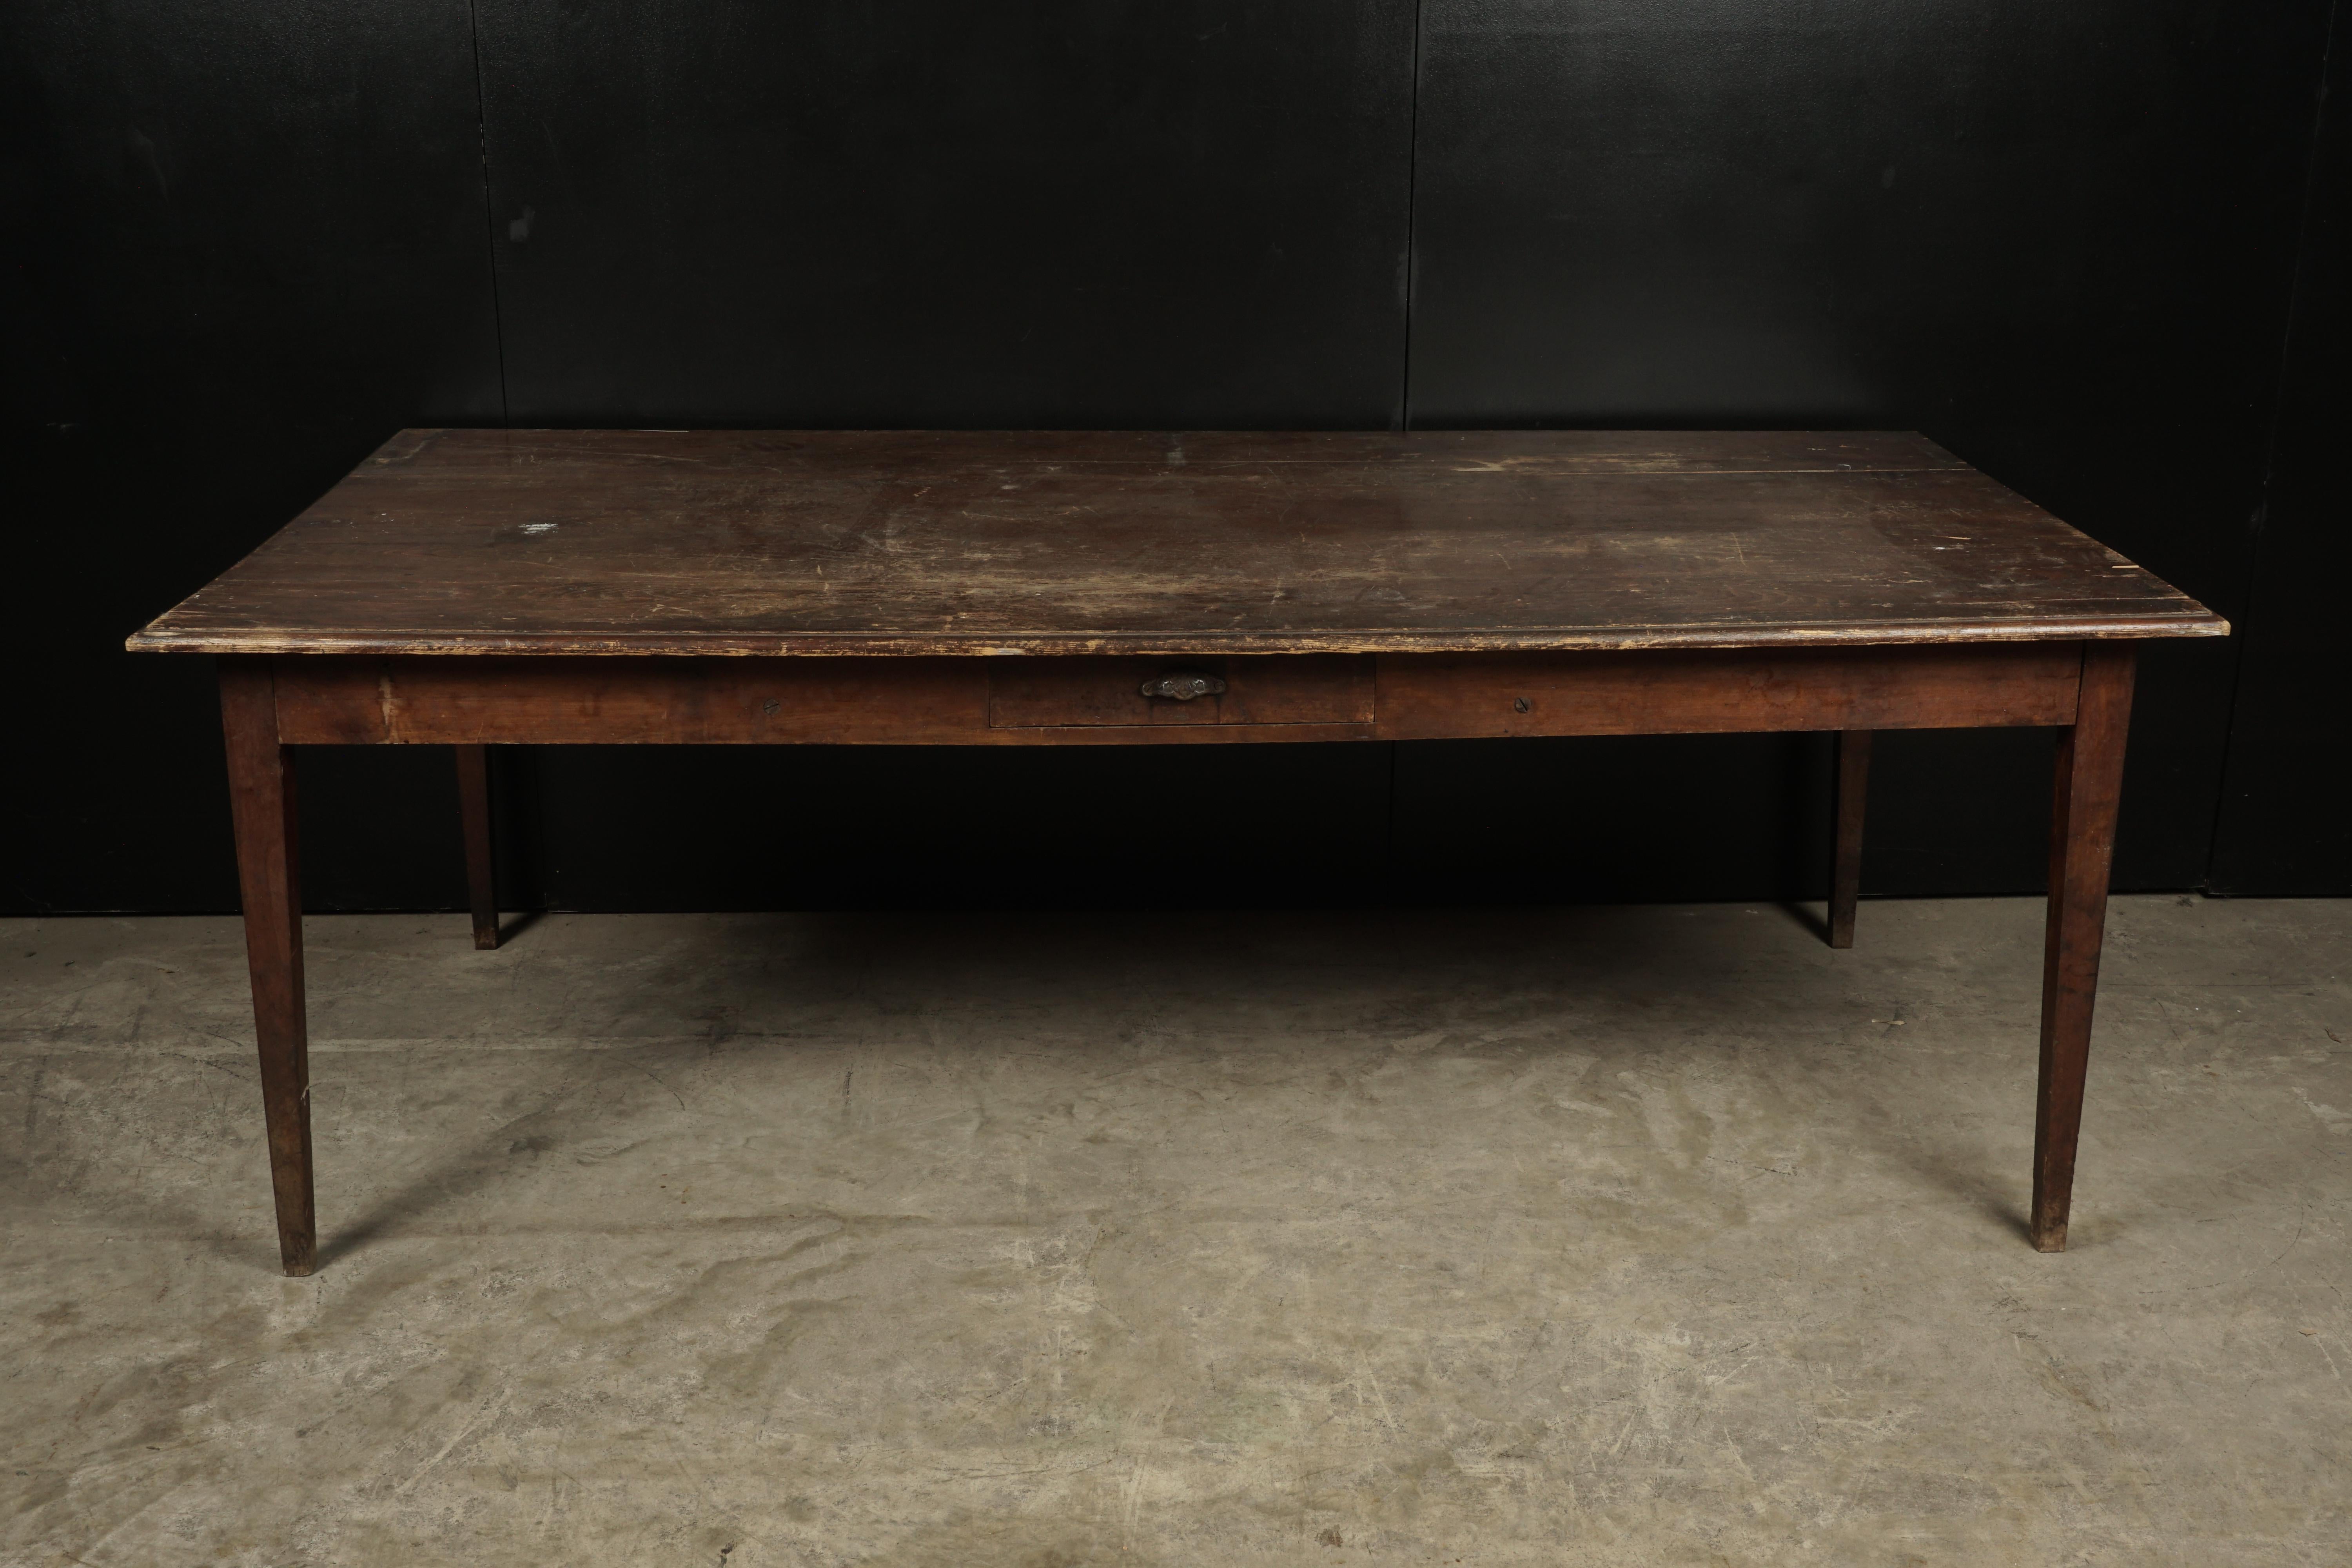 Large farm table from France, circa 1920. Solid pine construction with two drawers. Top with nice patina.